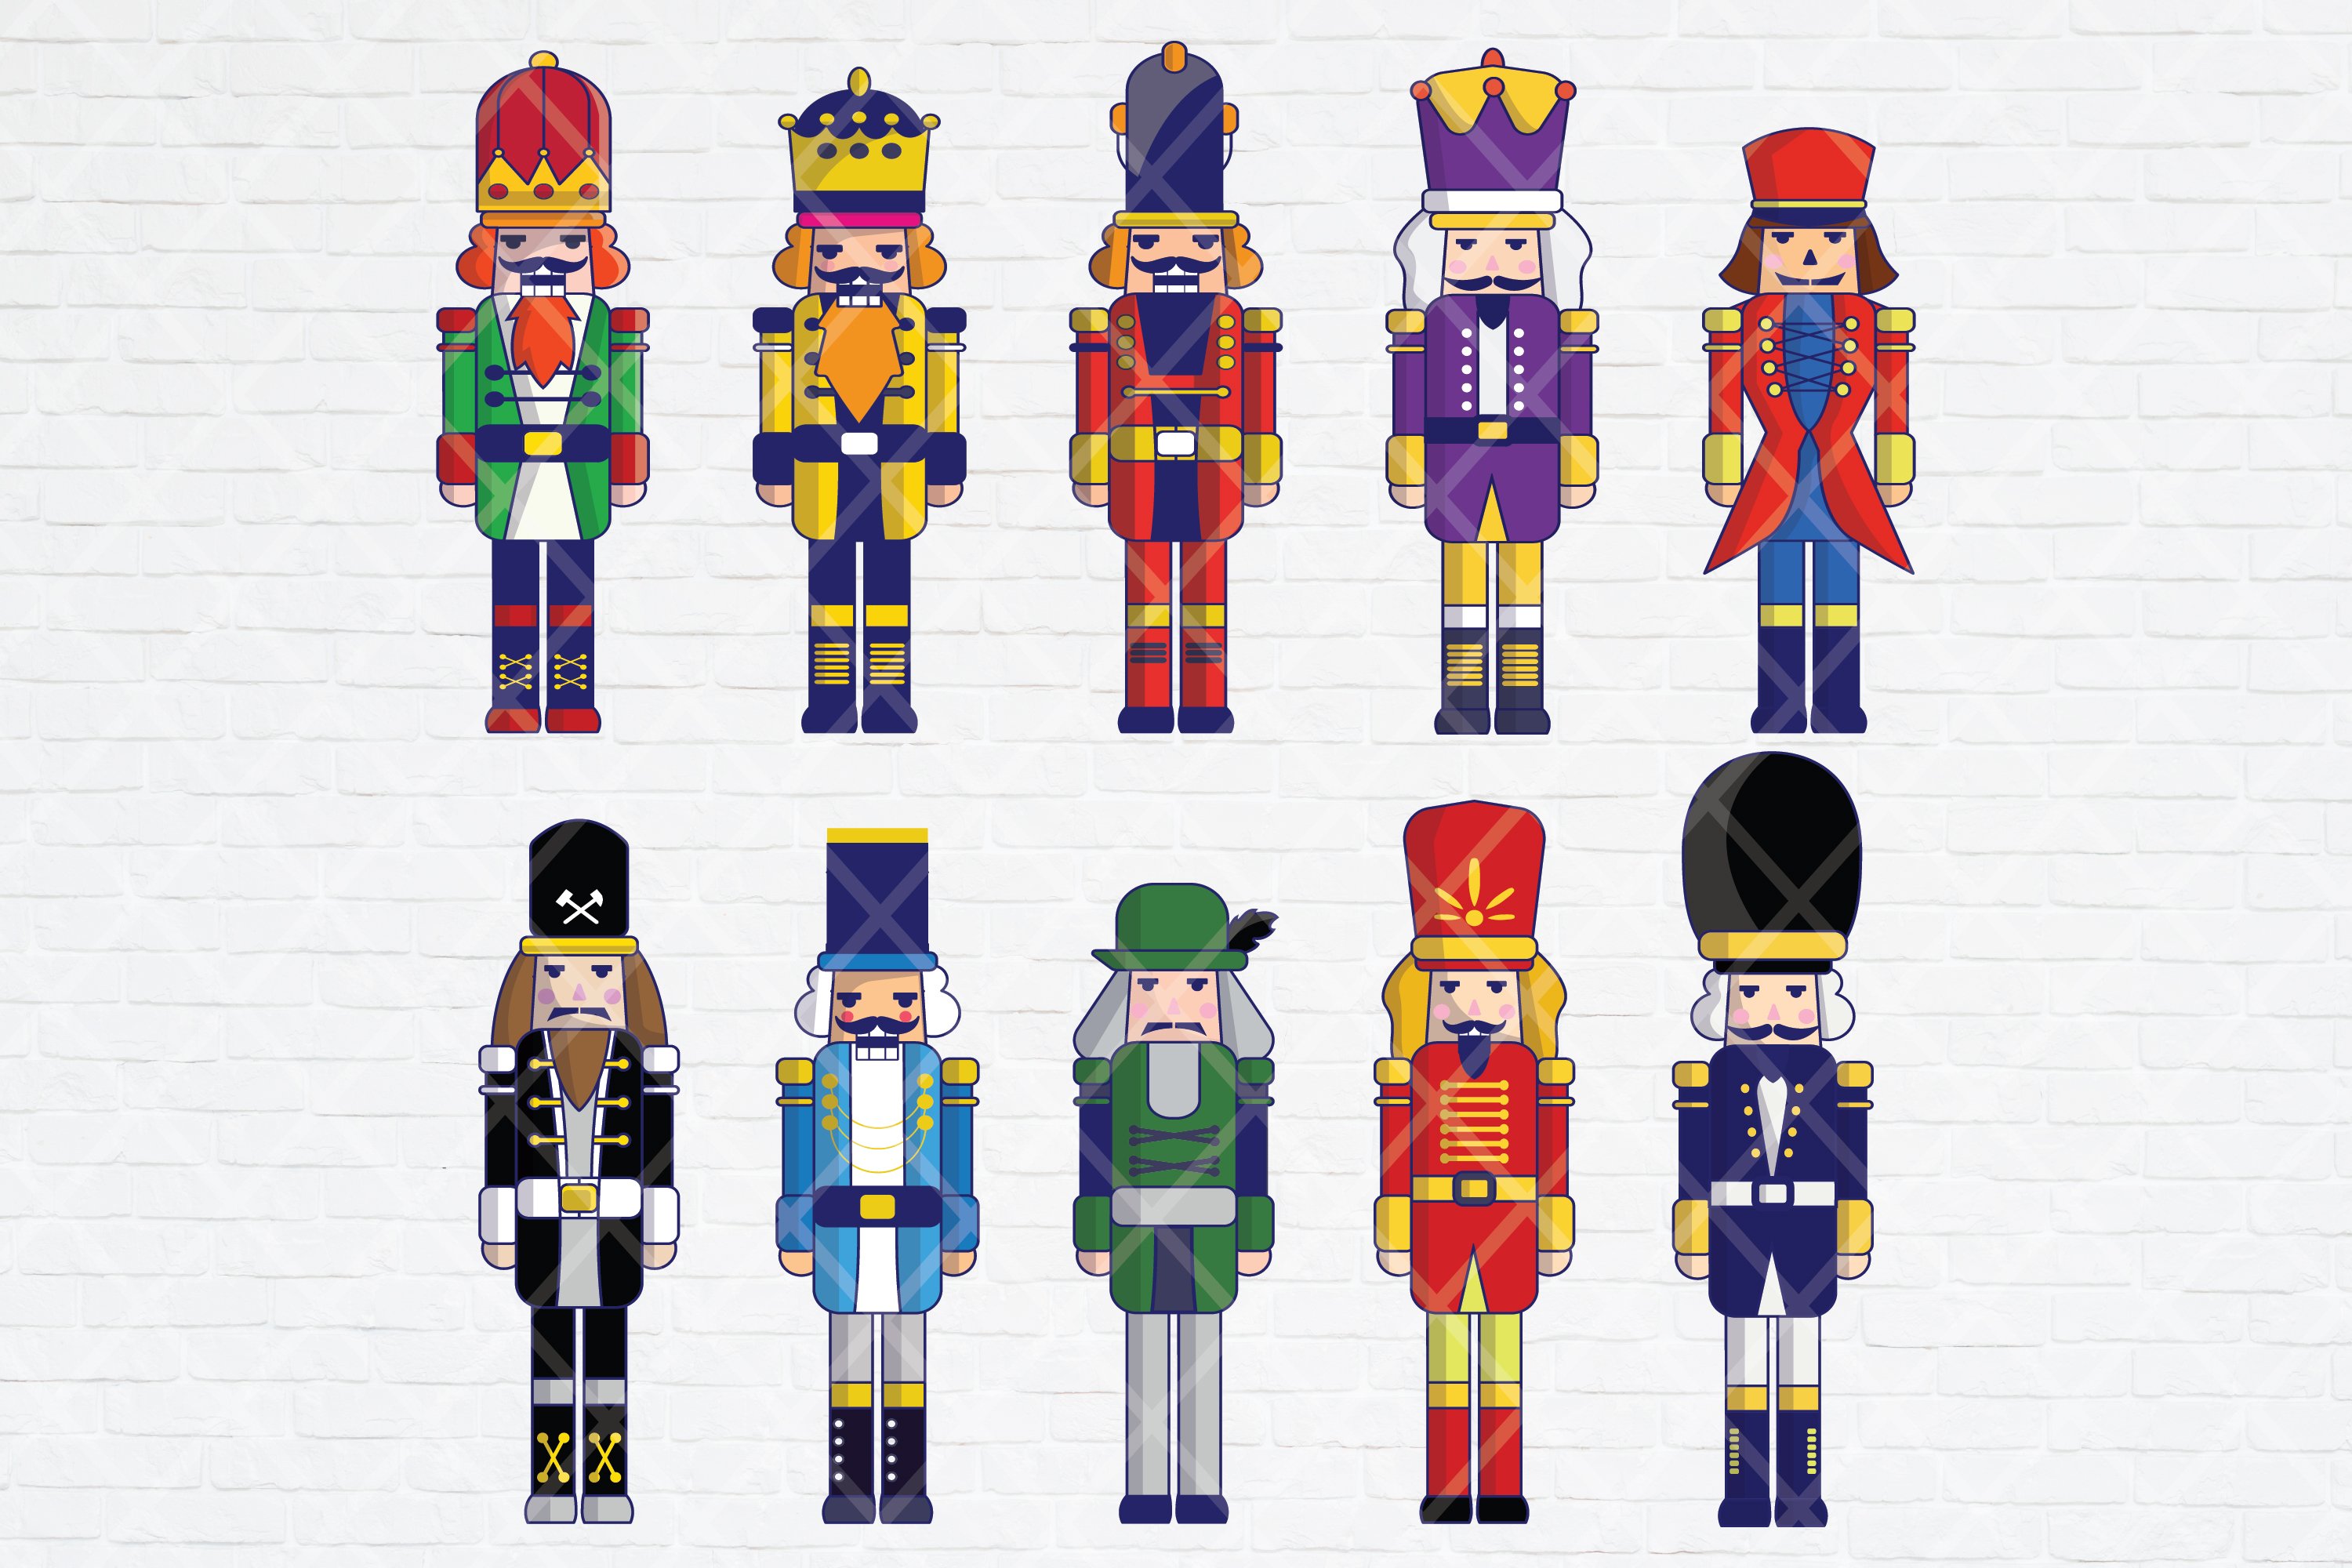 Christmas Nutcracker Toy Soldier preview image.